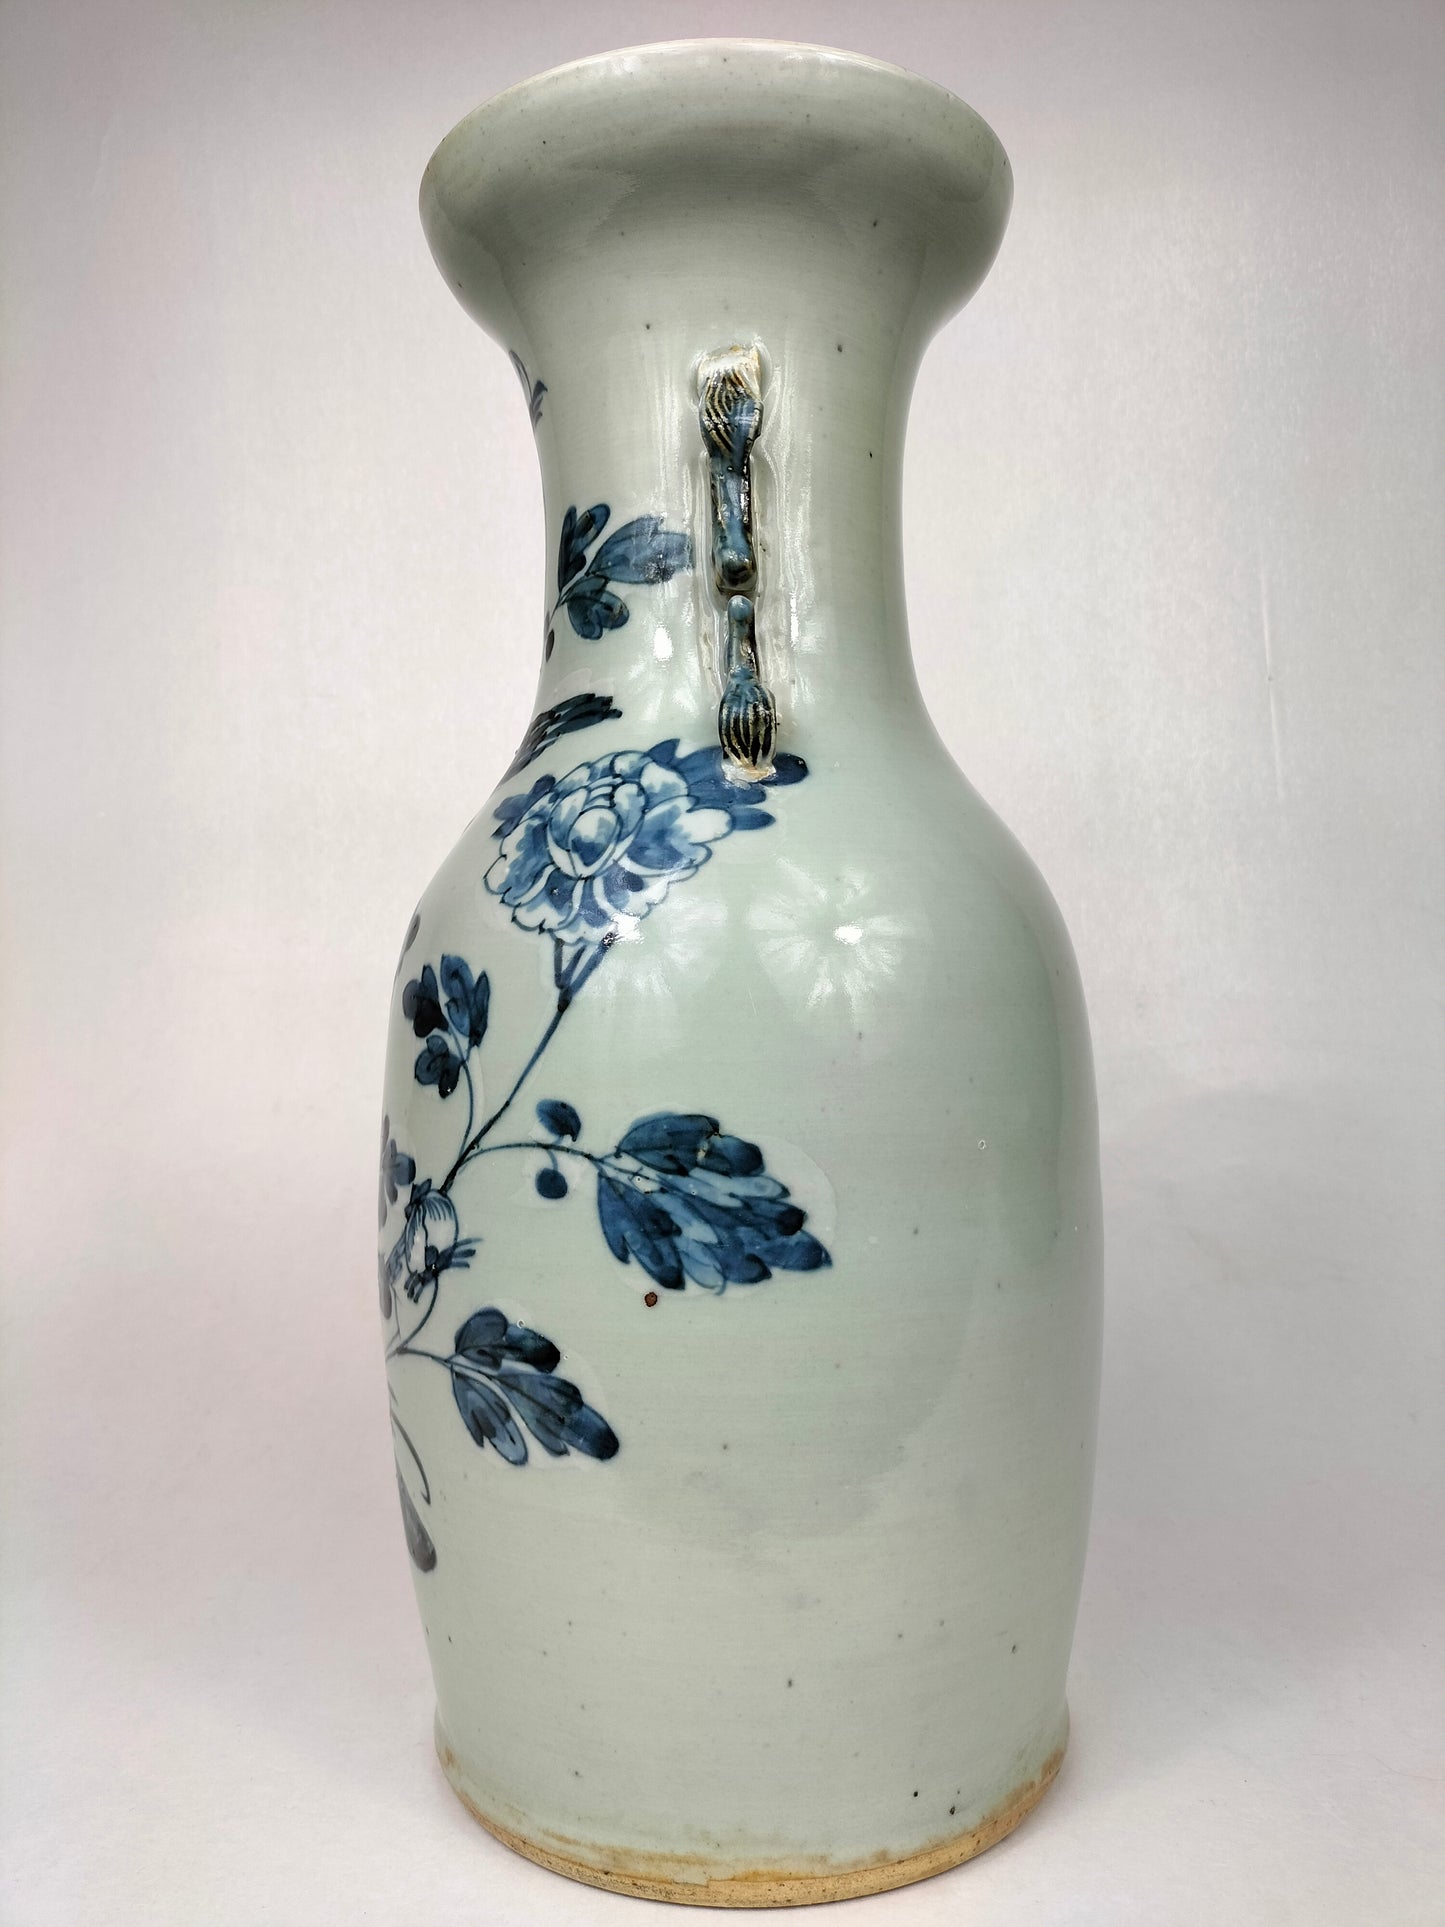 Antique Chinese celadon vase decorated with a bird and flowers // Qing Dynasty - 19th century